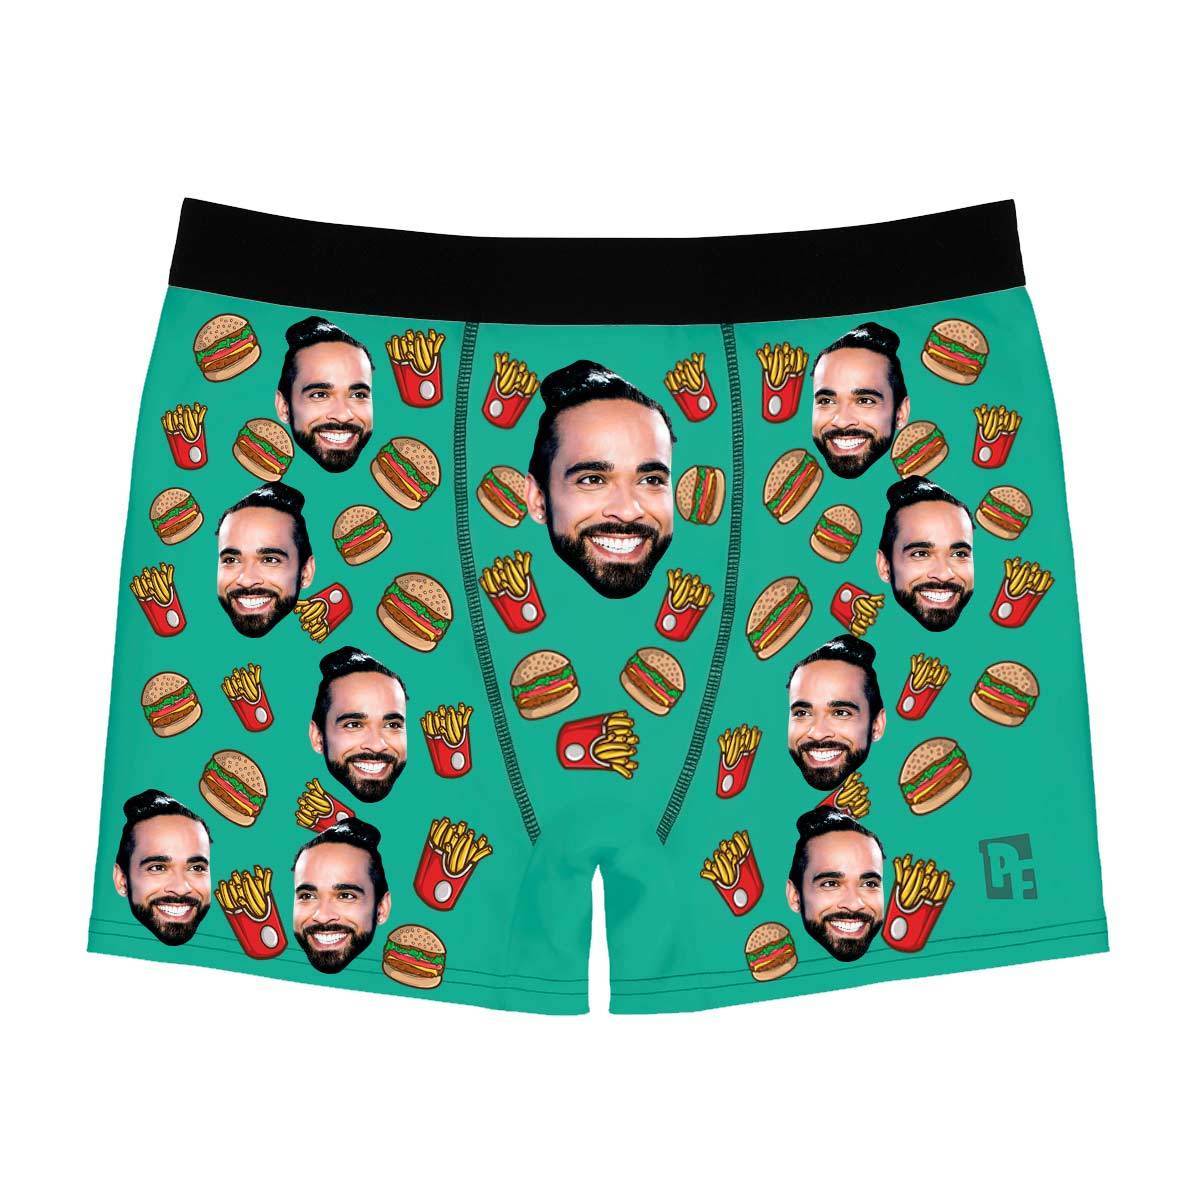 Mint Fastfood men's boxer briefs personalized with photo printed on them